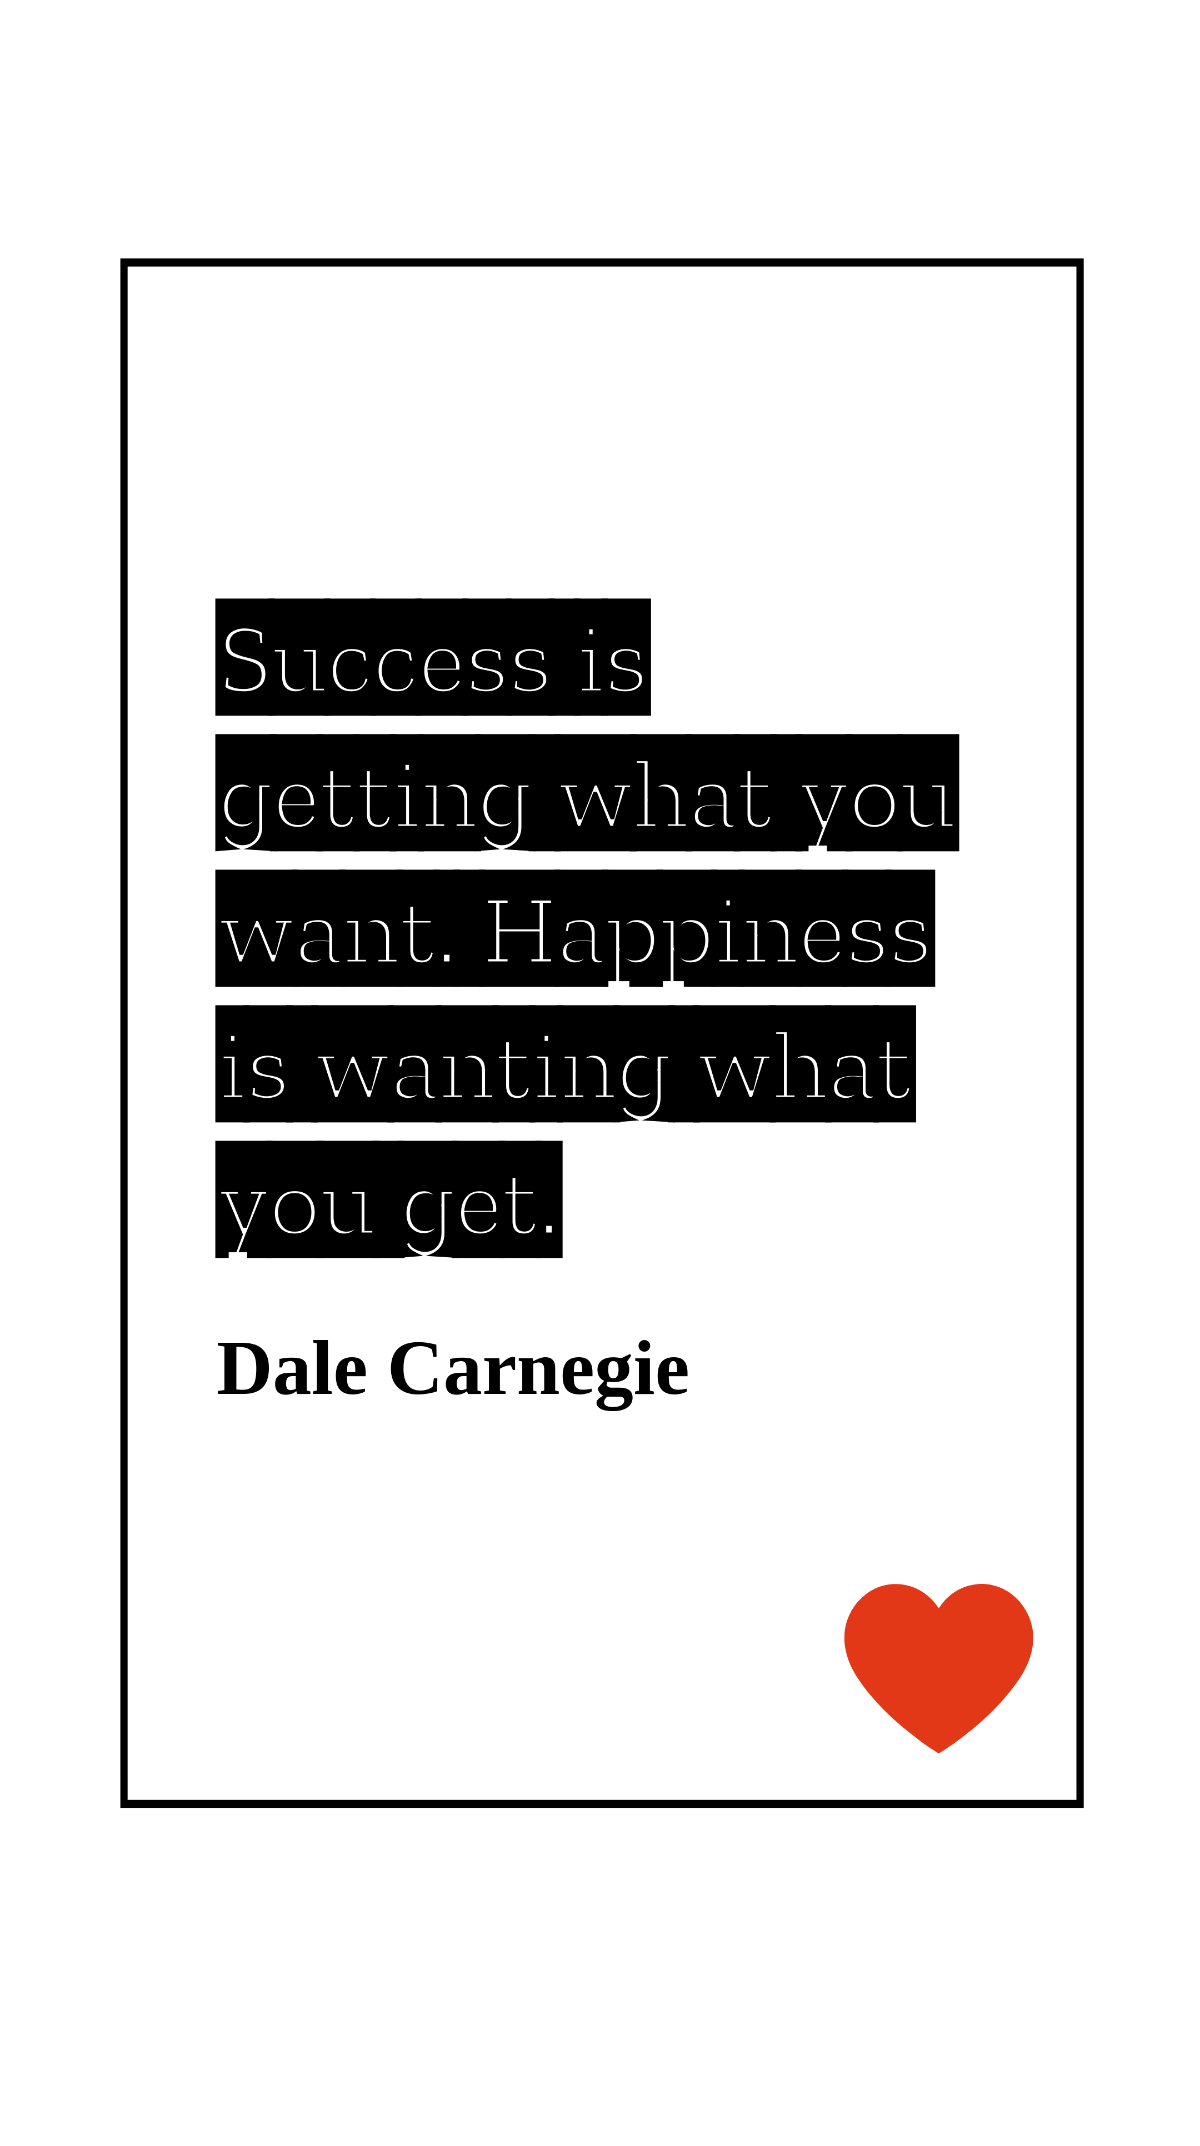 Dale Carnegie - Success is getting what you want. Happiness is wanting what you get. Template